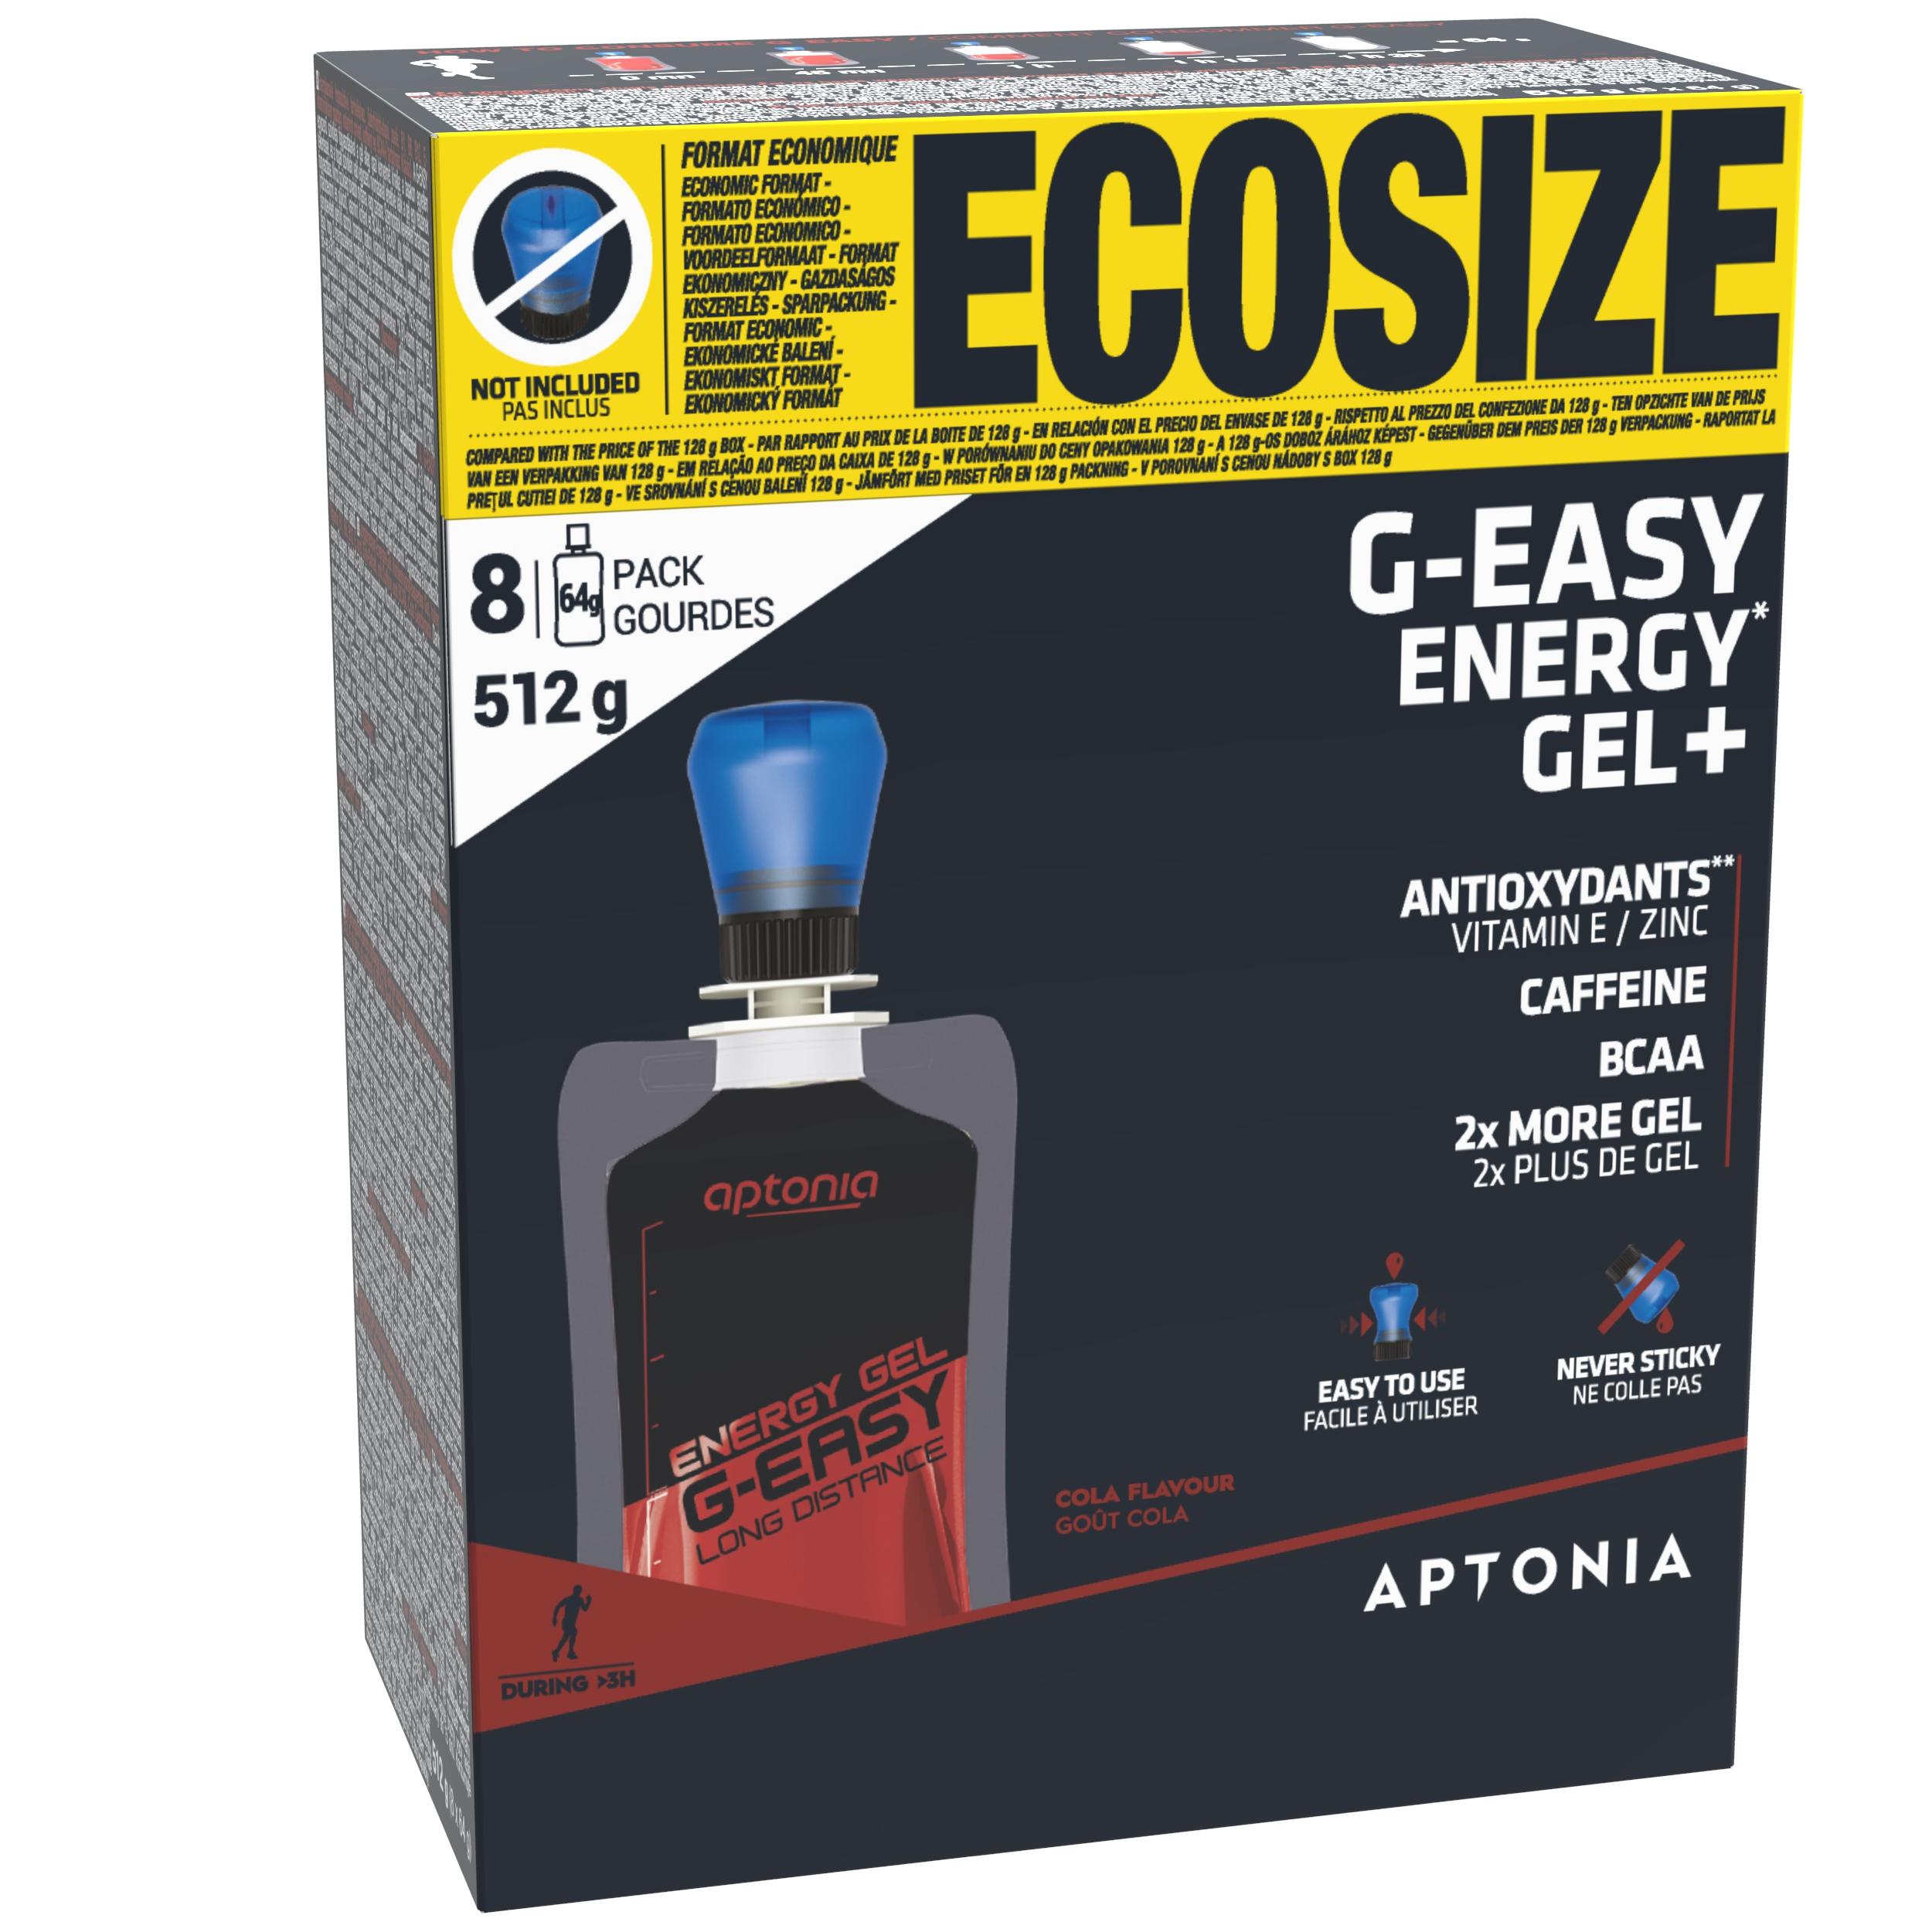 G-EASY ECO-SIZE LONG-DISTANCE ENERGY 